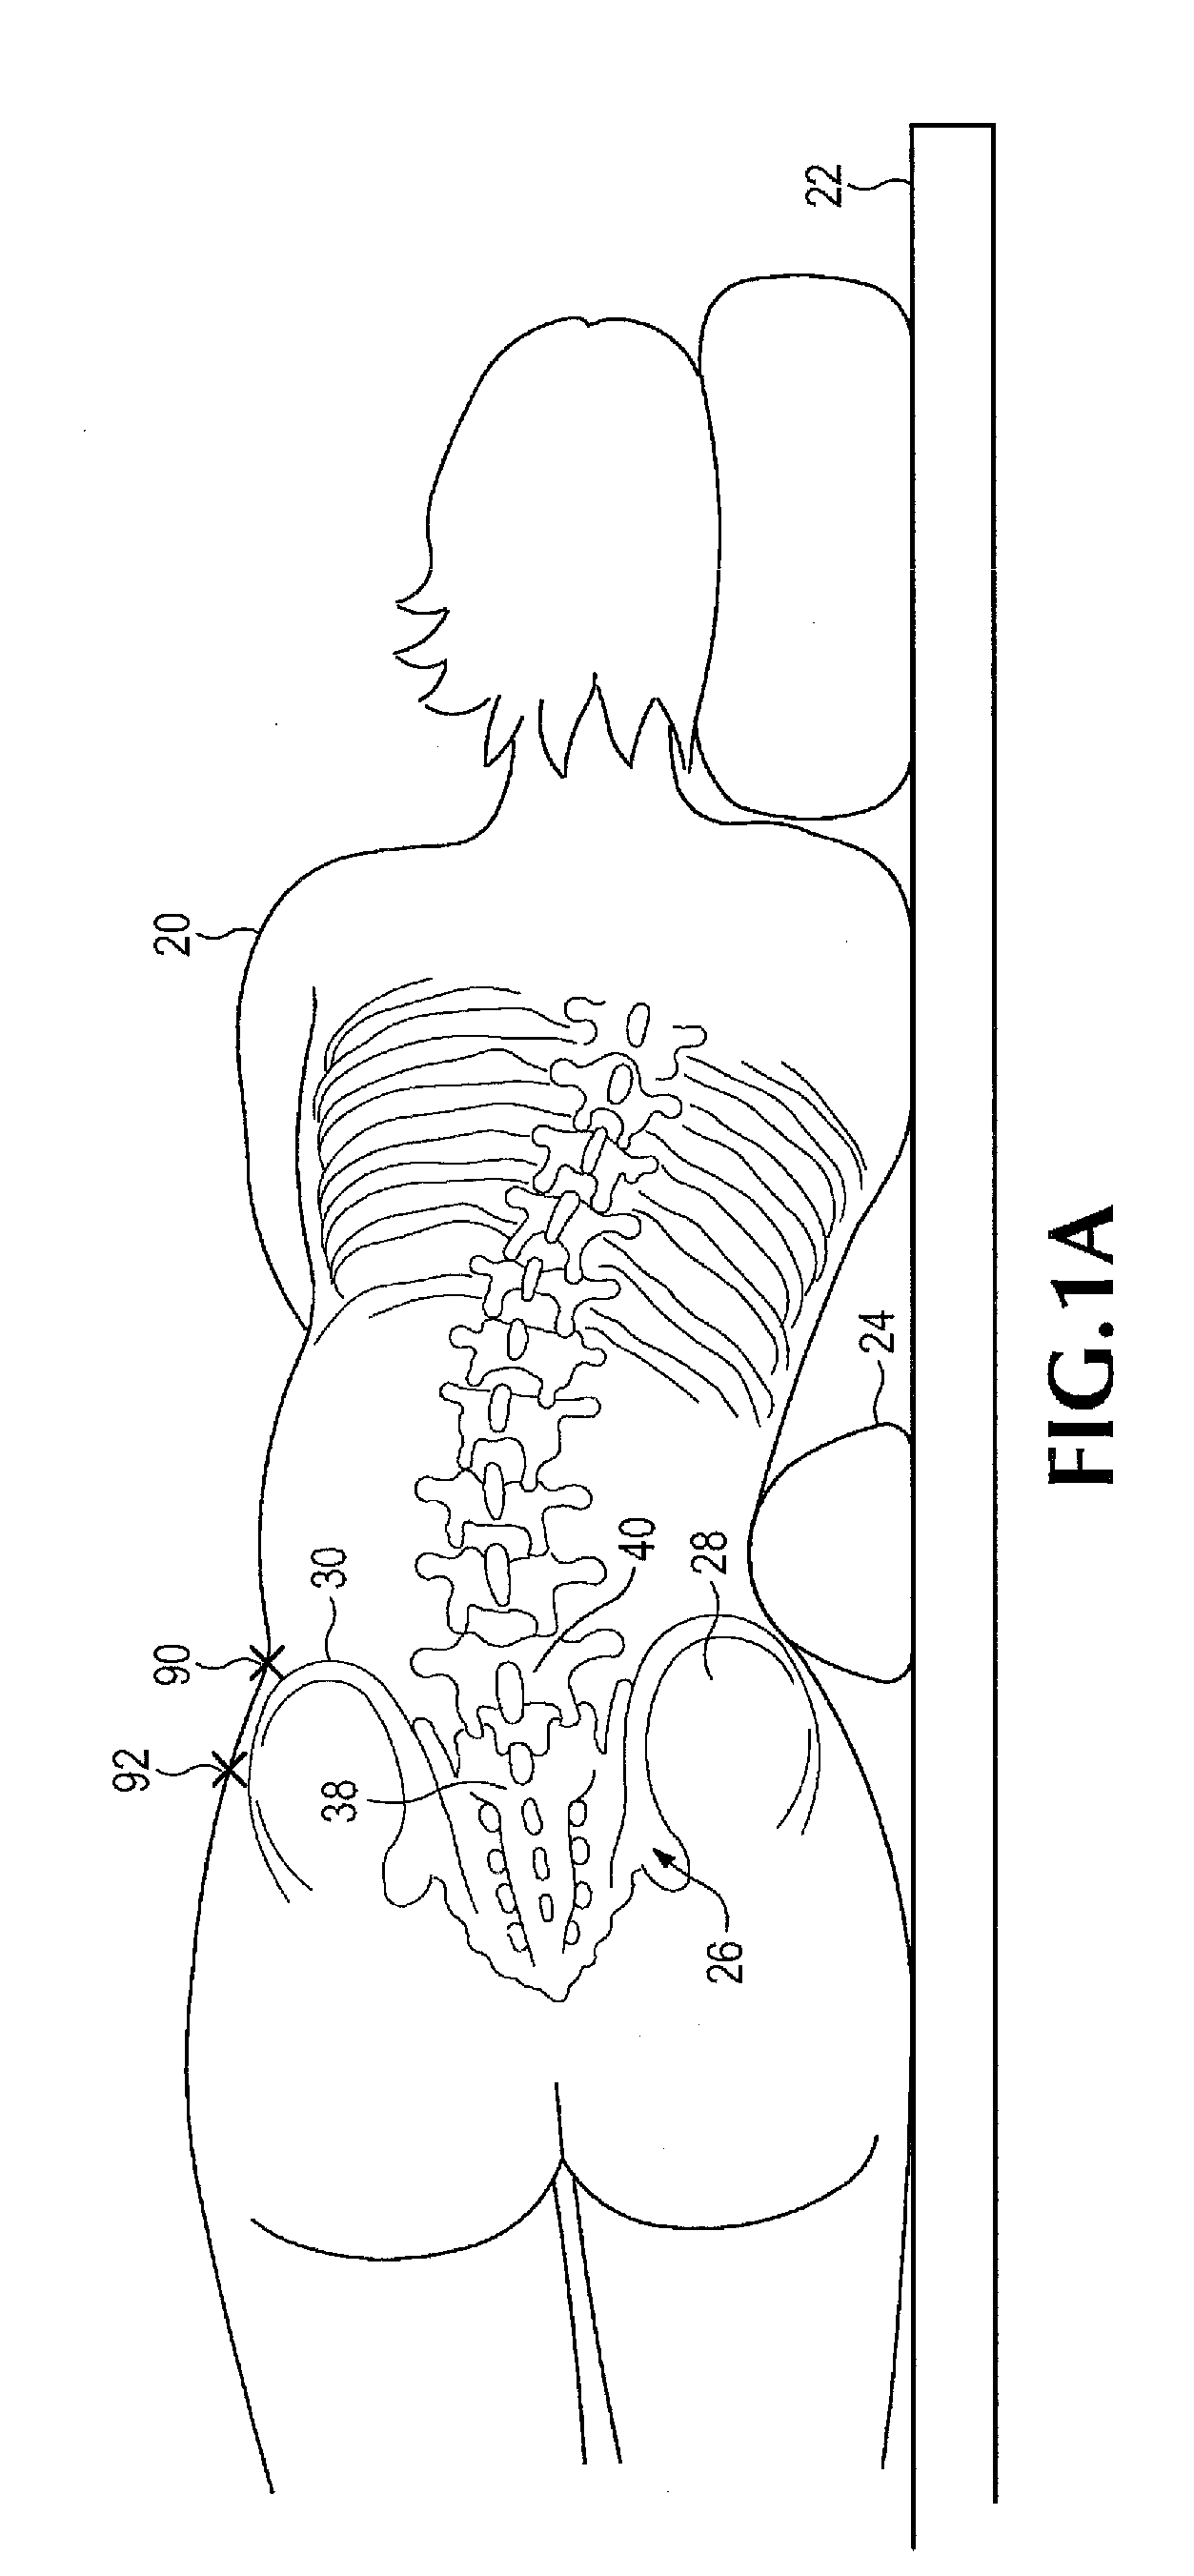 Retractor for use during retroperitoneal lateral insertion of spinal implants